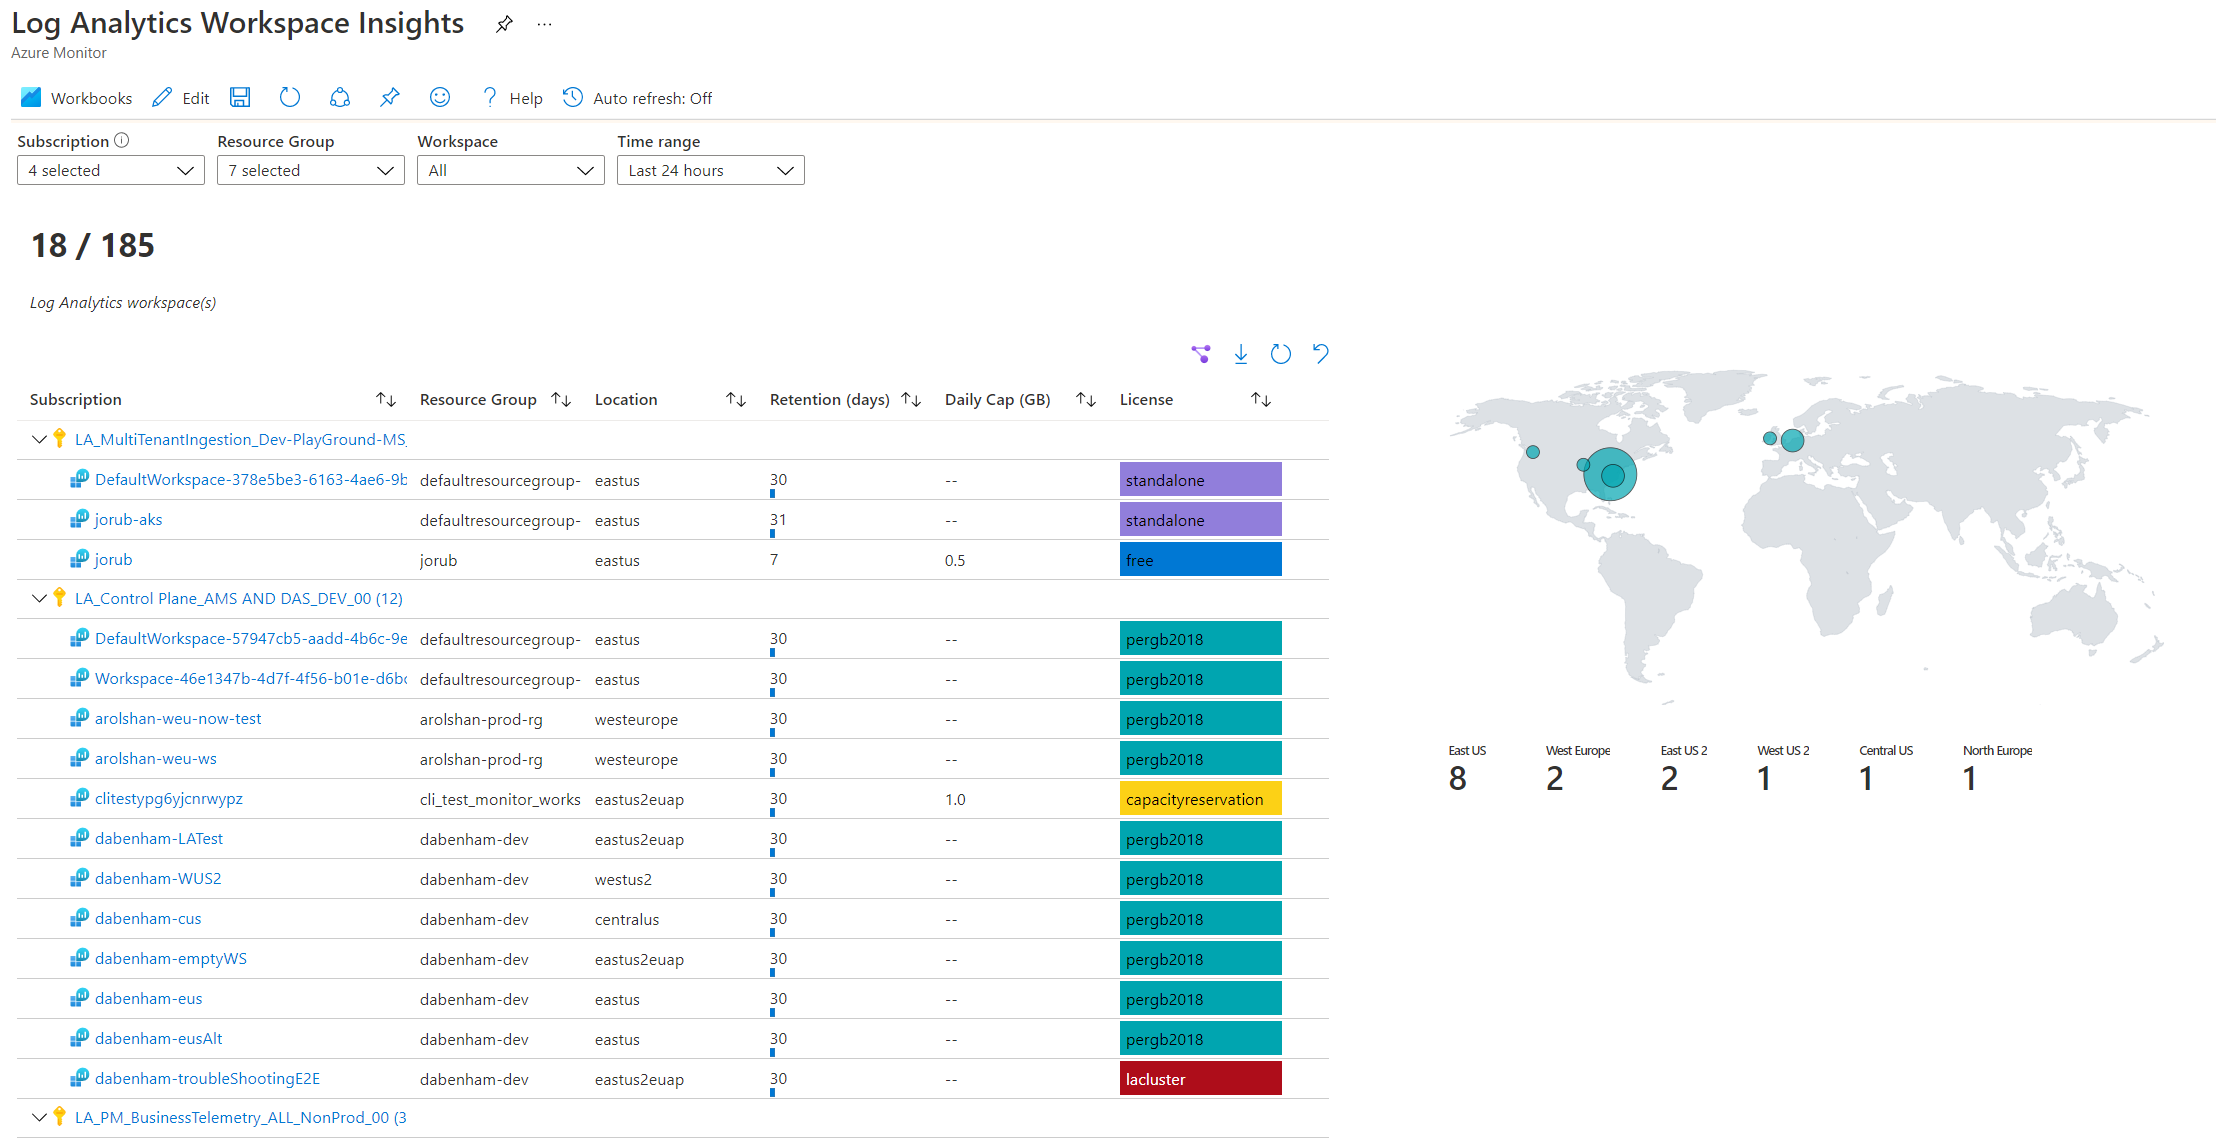 Screenshot that shows a Log Analytics Workspace Insights list of workspaces.